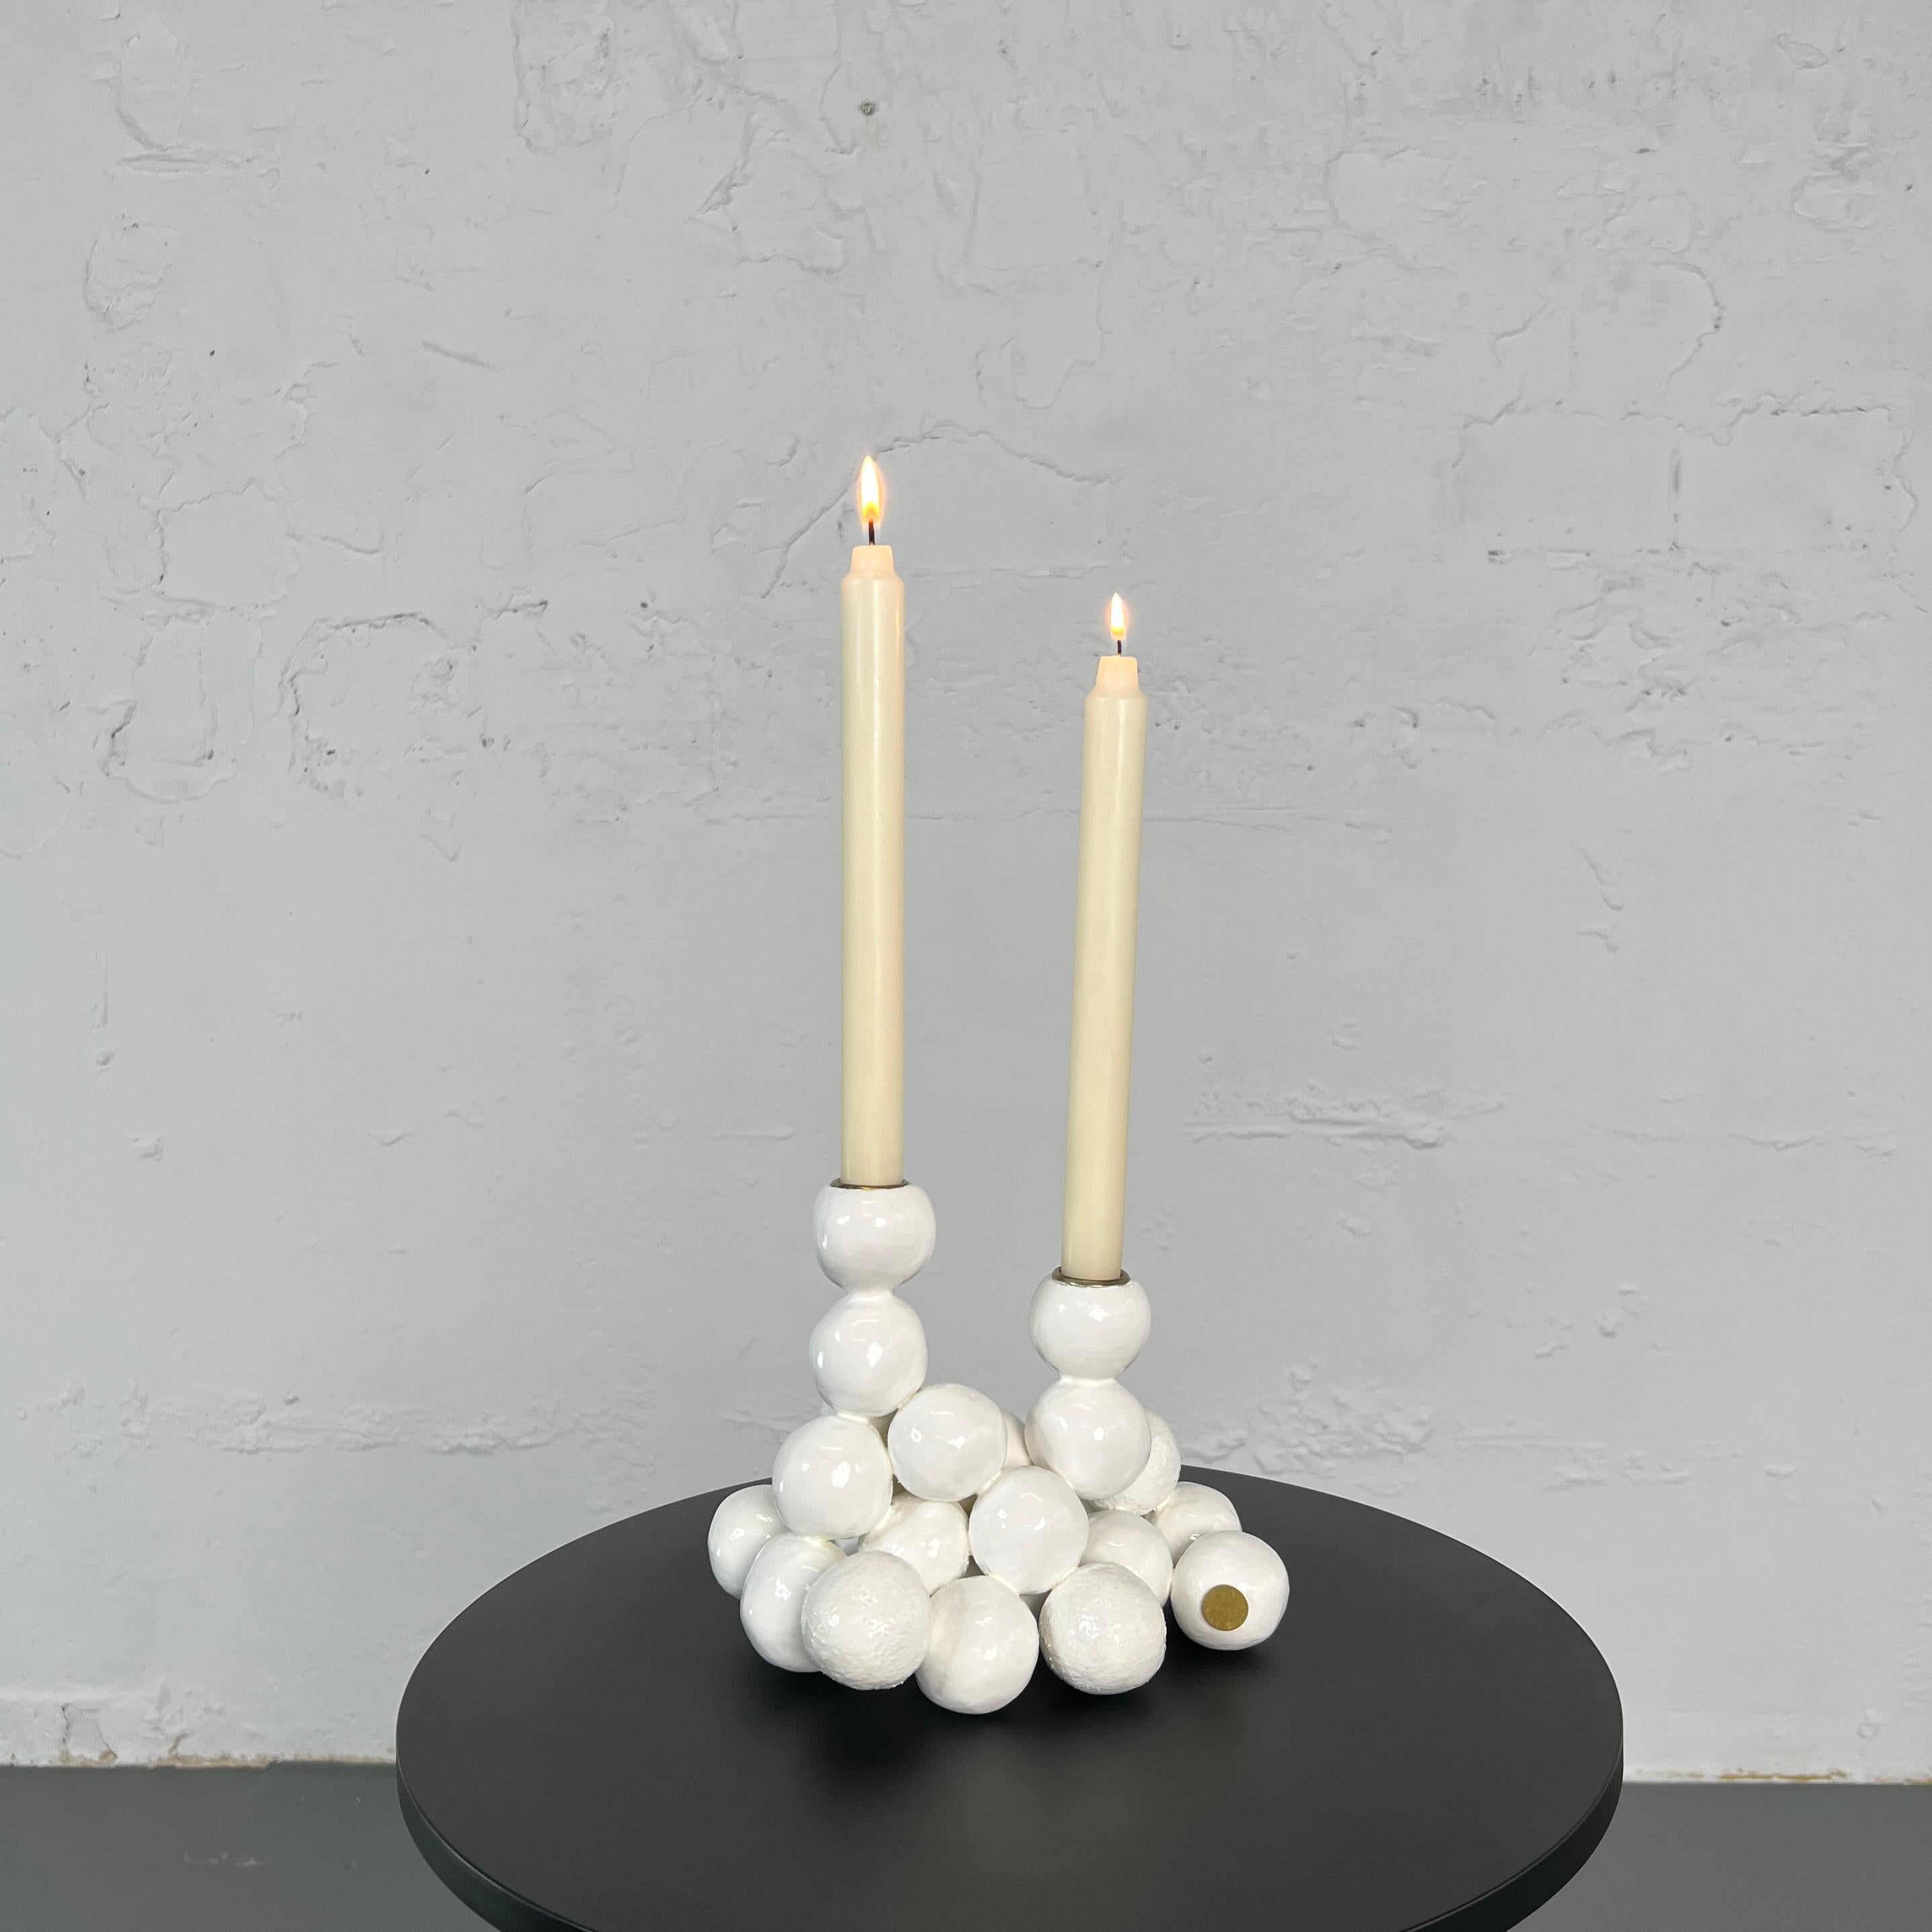 IRENA TONE Abstract Sculpture - Arty White Candleholder "Textures Pearls" for 2 Candles Sphere Original Sculptur